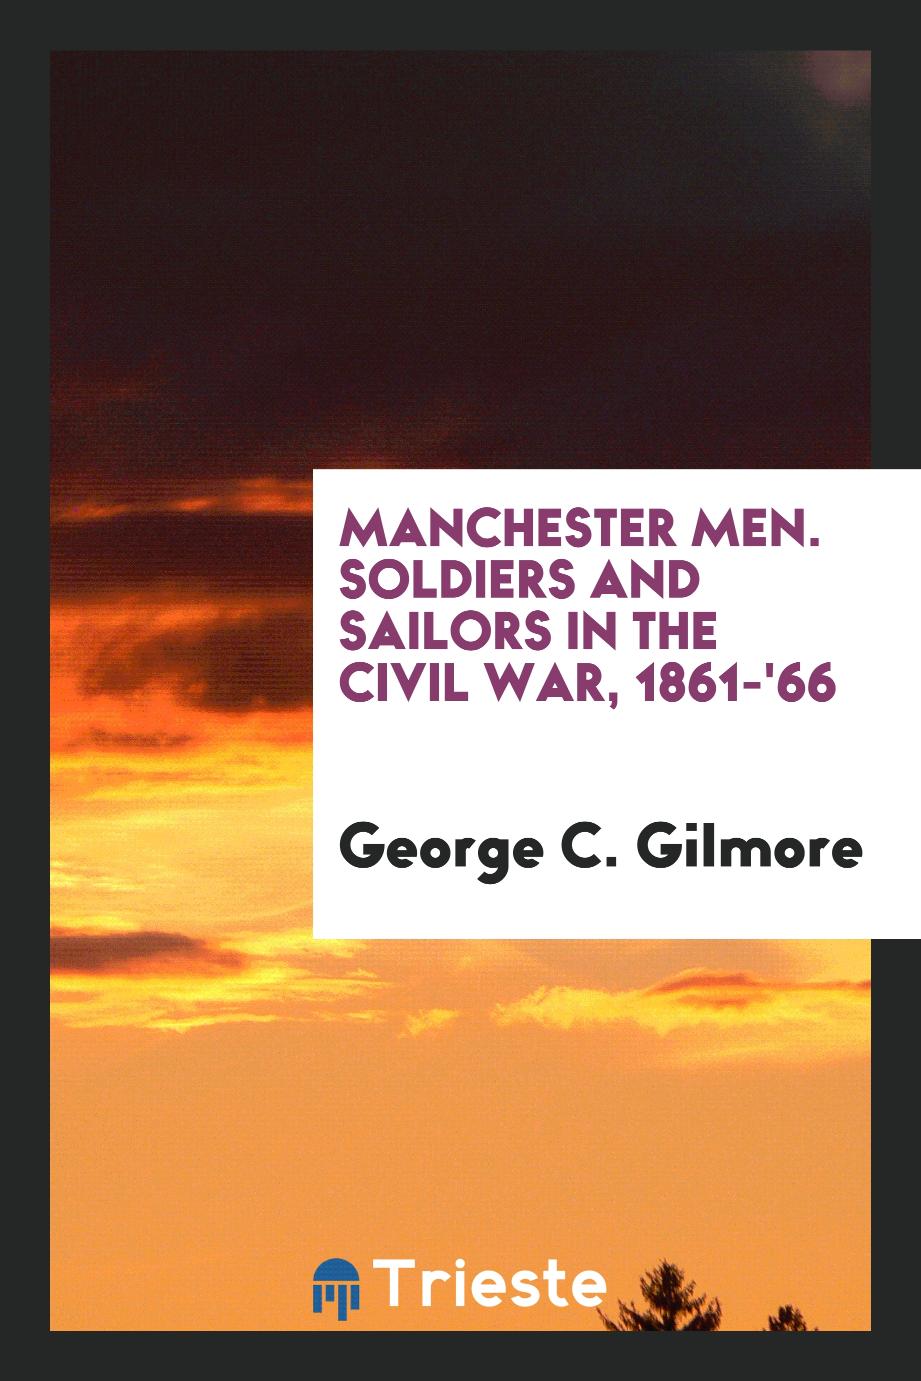 Manchester Men. Soldiers and Sailors in the Civil War, 1861-'66